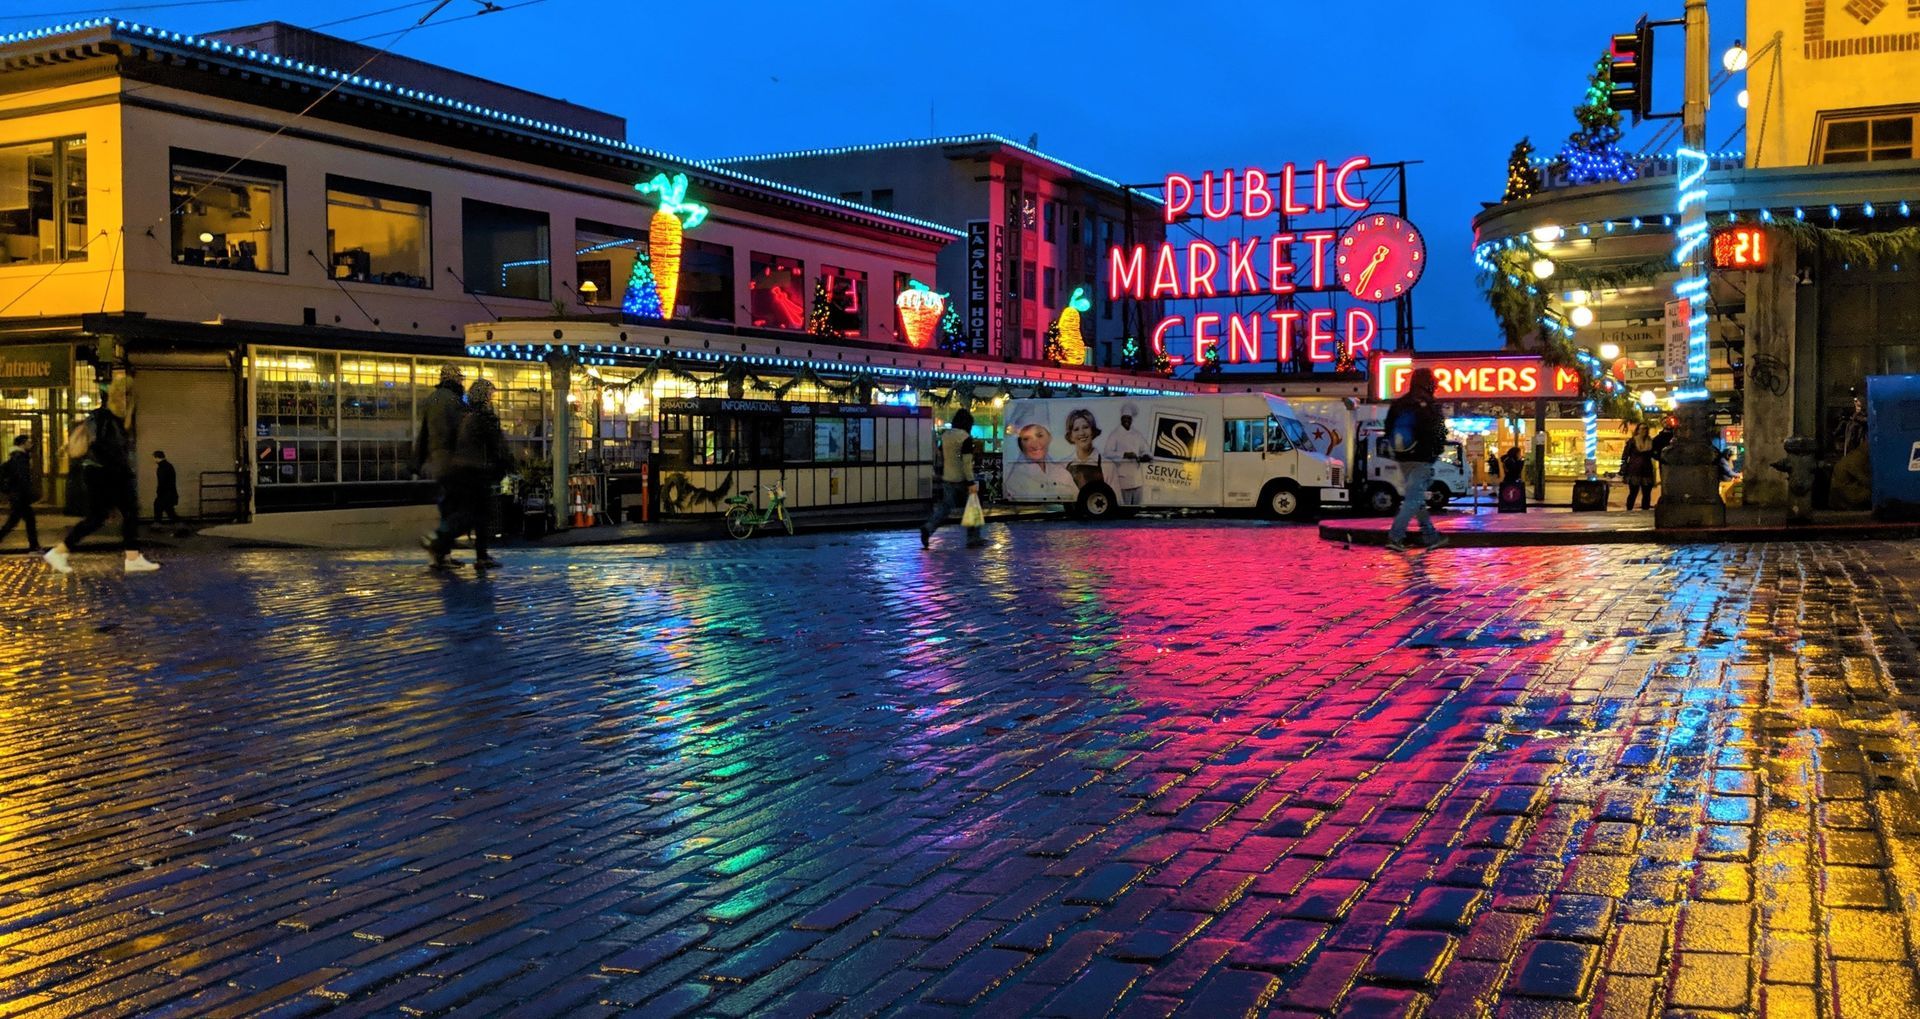 Pike Place Market Seattle at night with wet rainy street